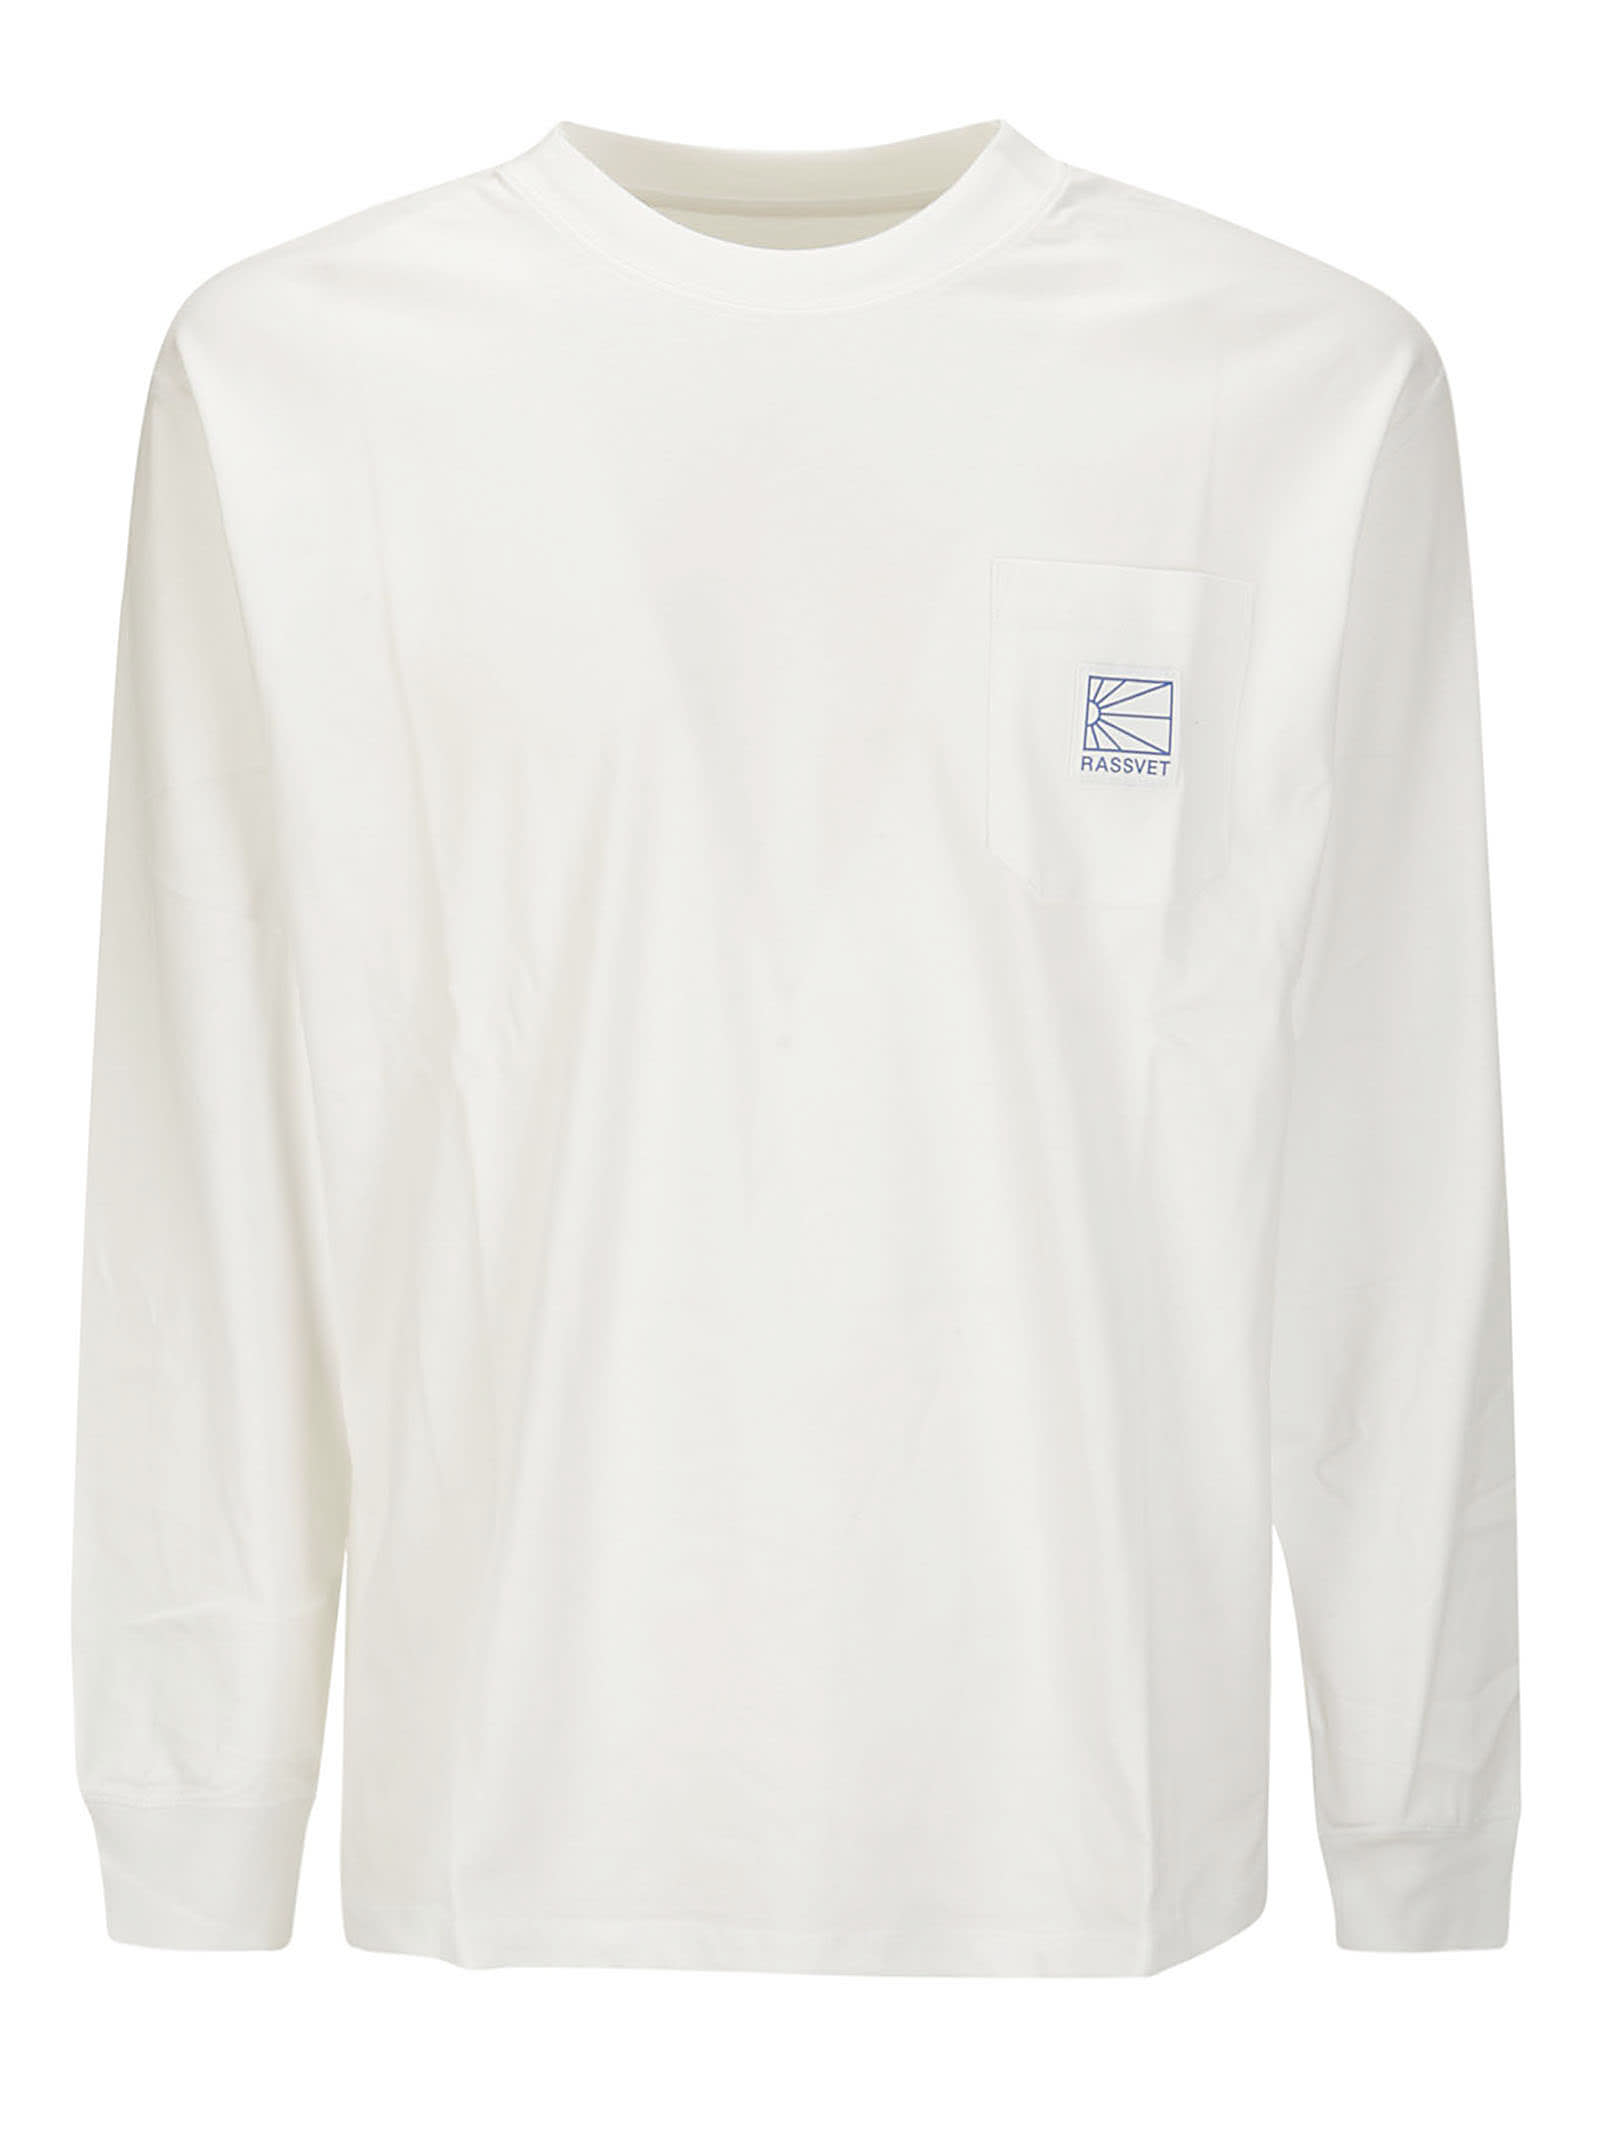 PACCBET Men Pocket Tag Long Sleeve Tee Shirt Knit - WHITE - male - Size: Small